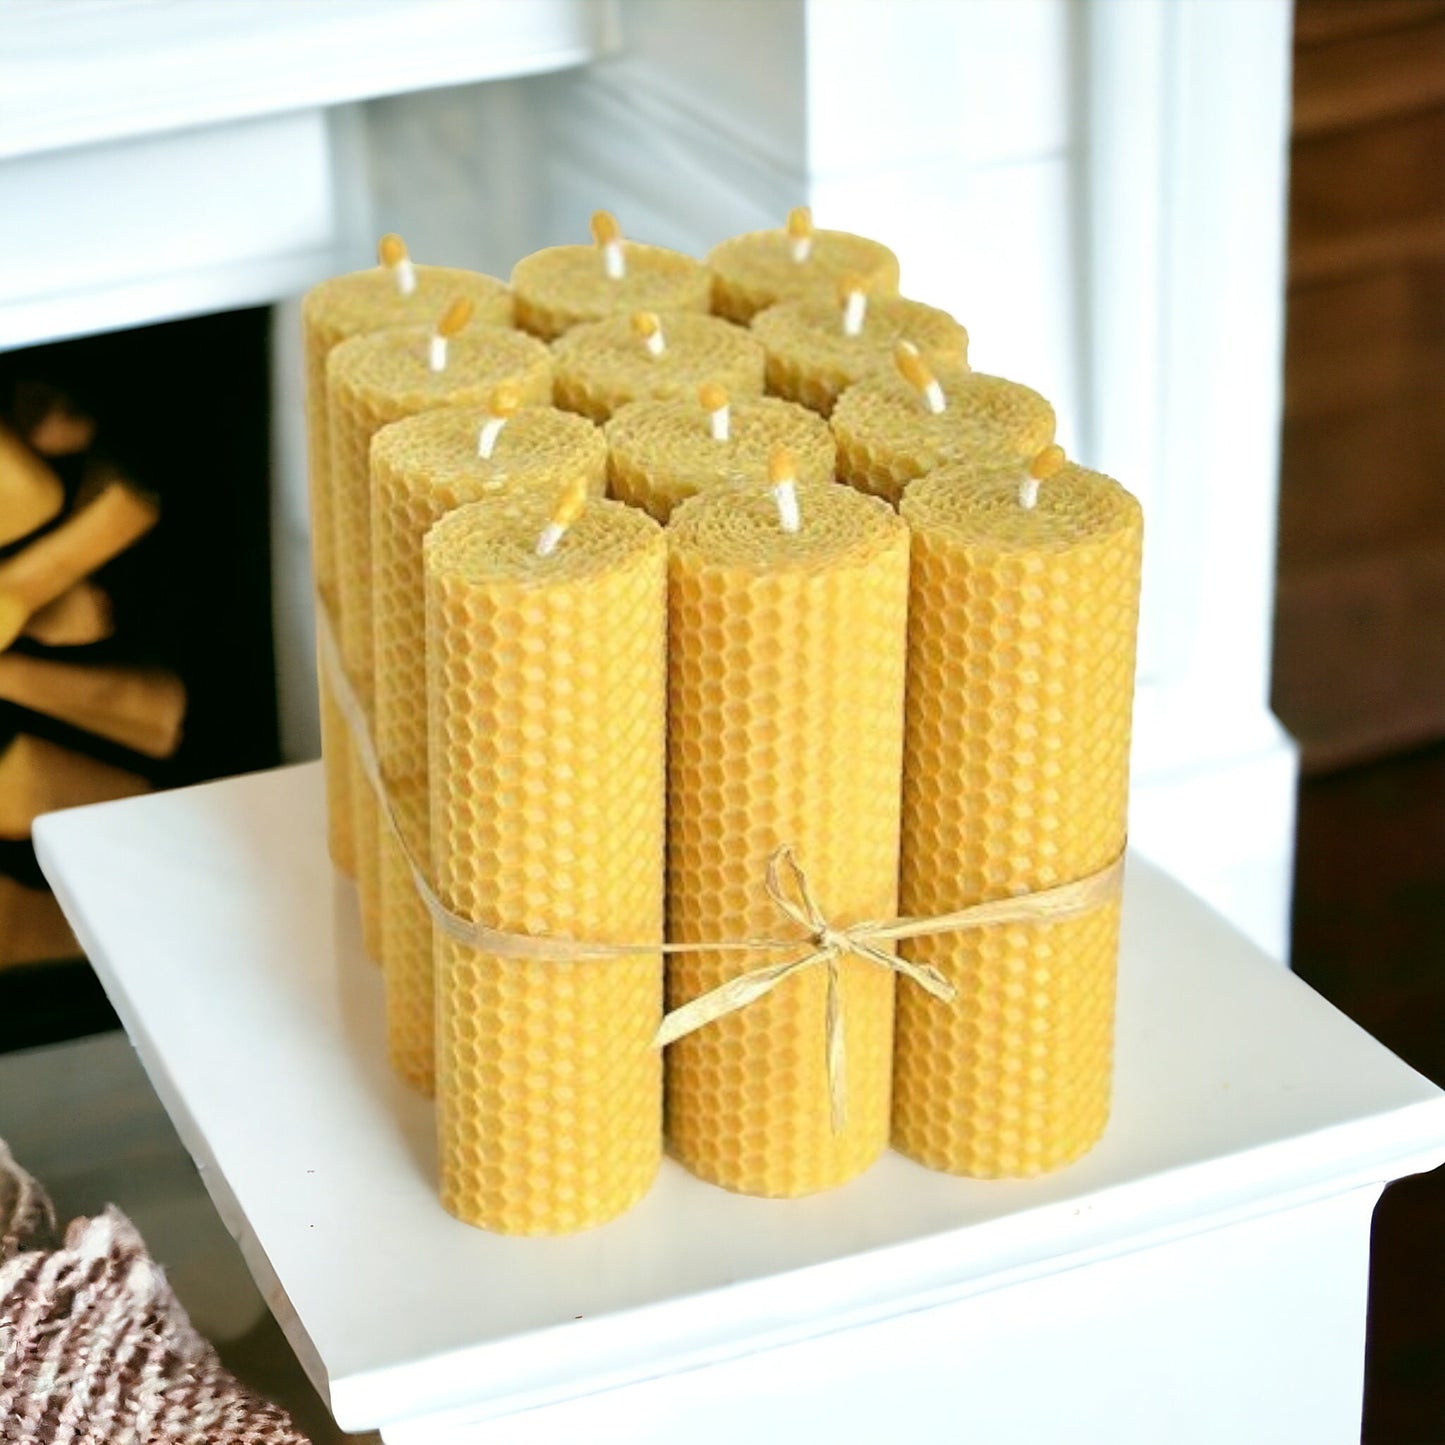 20 pcs Ritual Candles package, %100 pure beeswax candles, bulk candles